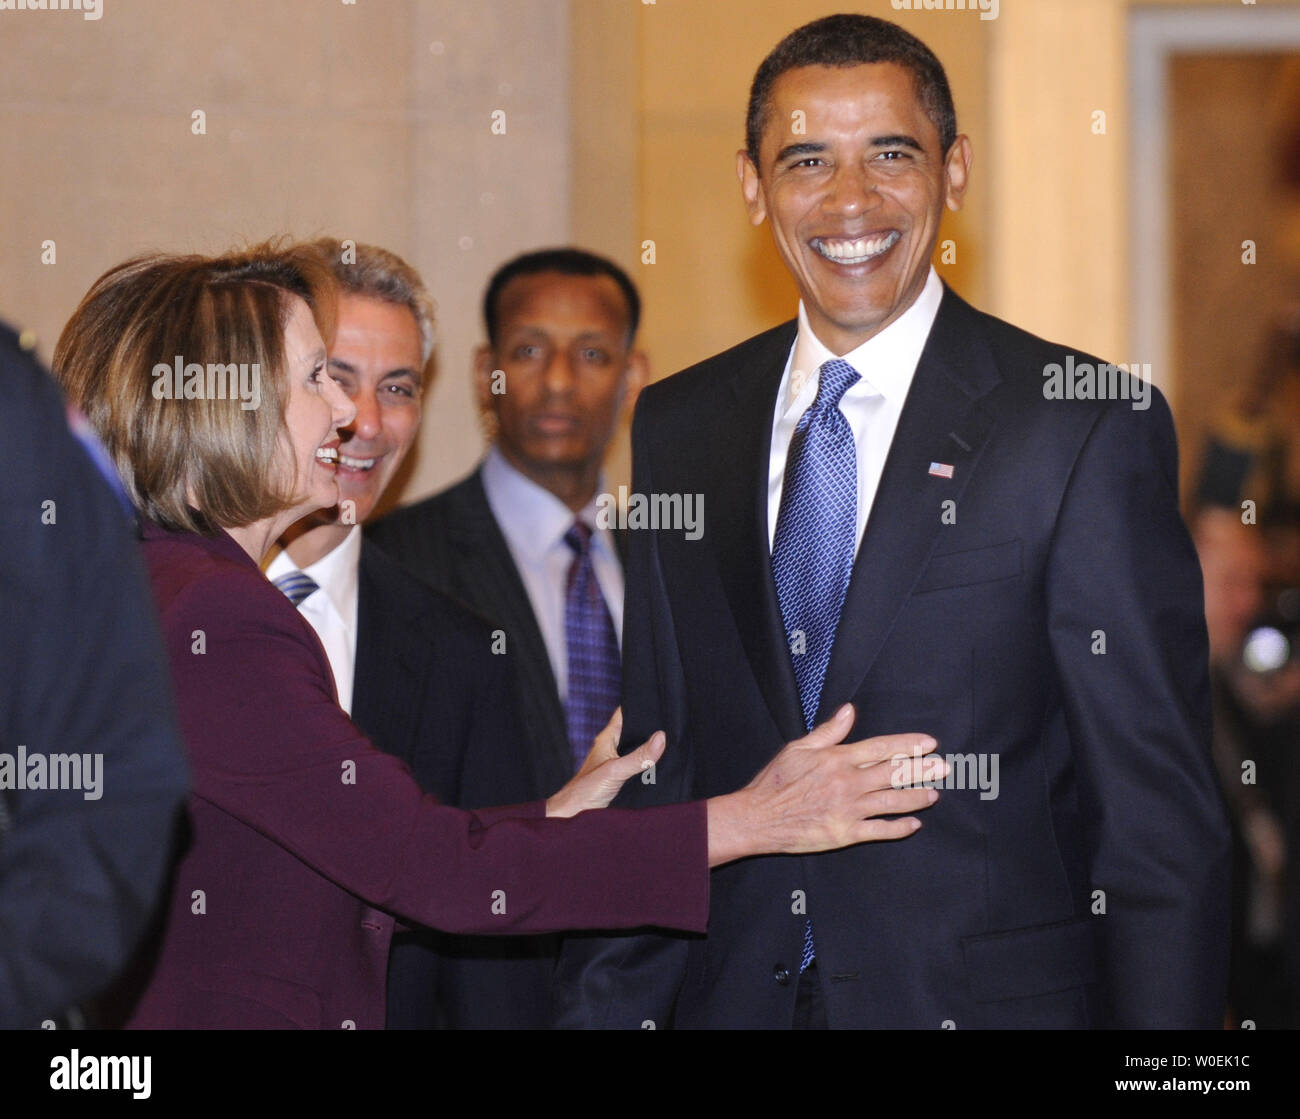 President-elect Barack Obama jokes with Speaker of the House Nancy Pelosi (D-CA) after a meeting in the U.S. Capitol Building in Washington on January 5, 2008. (UPI Photo/Kevin Dietsch) Stock Photo